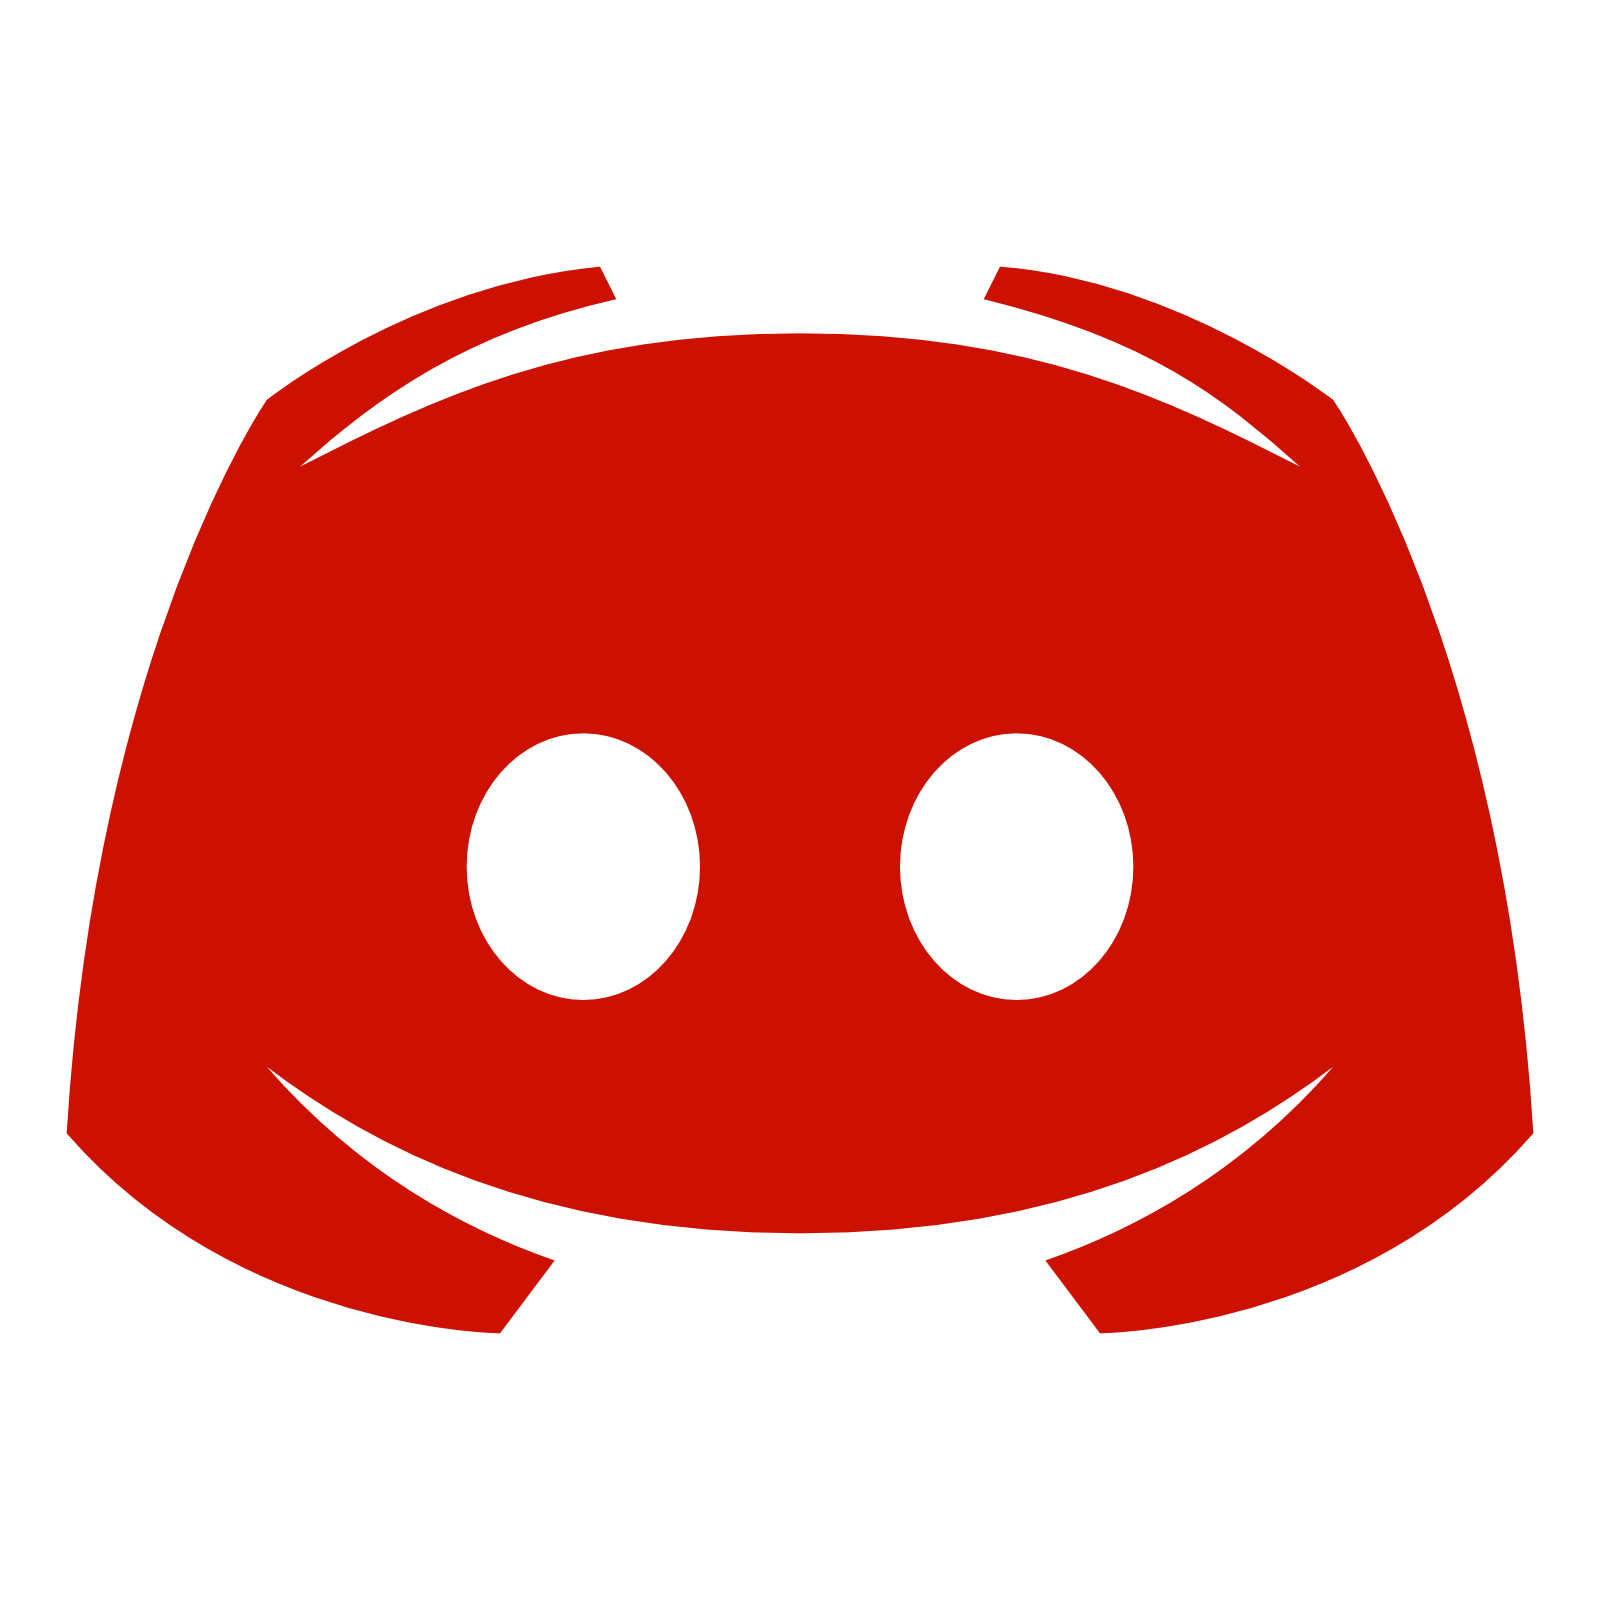 Red Discord Logo Transparent Background  WICOMAIL